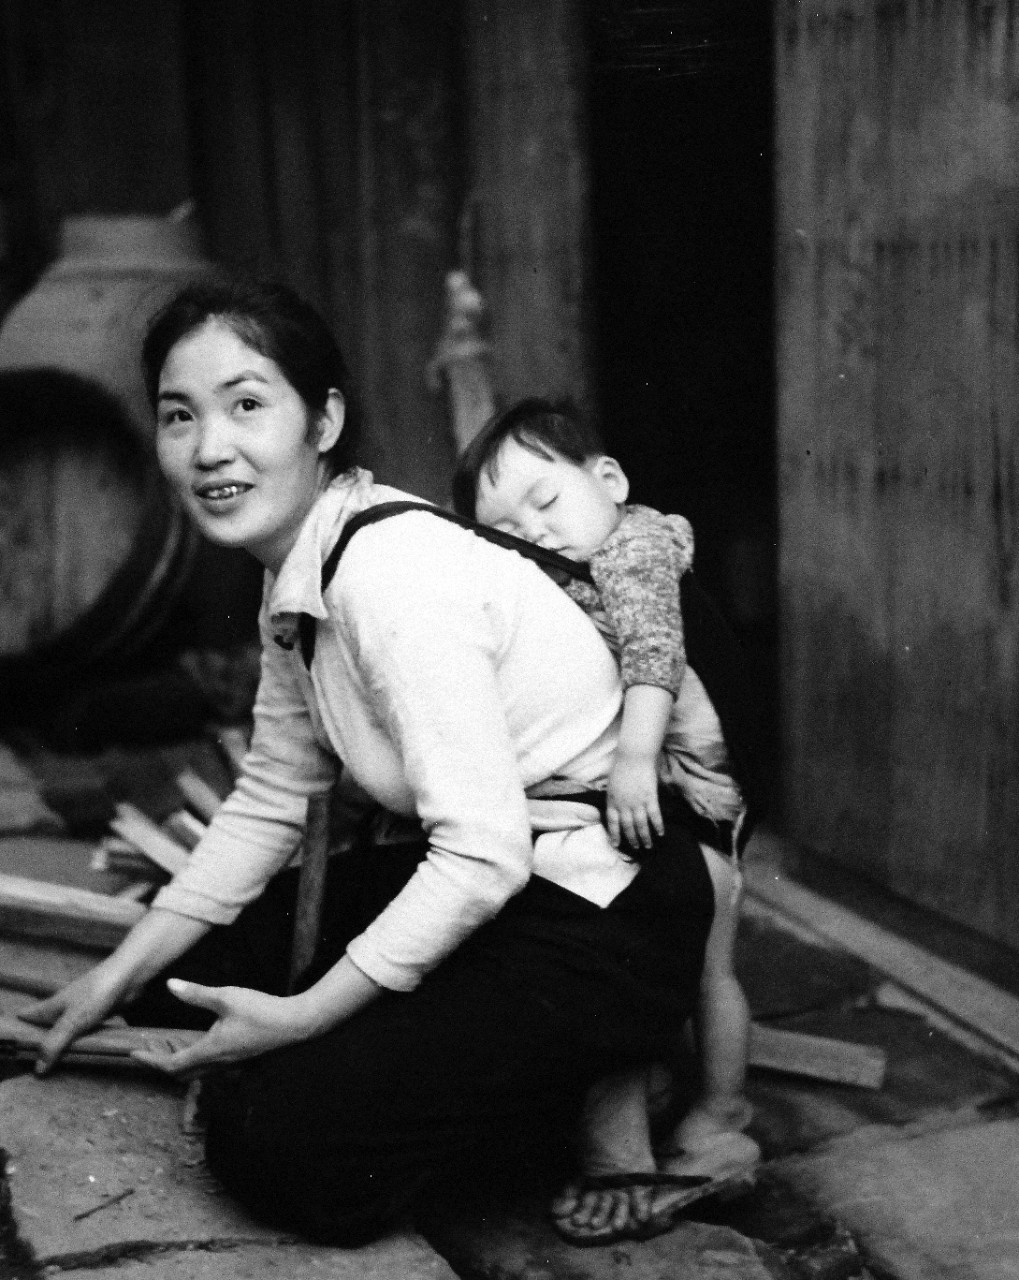 80-G-264848:   Occupation of Japan, 1945.    Scene at Sasebo, Kyushu, Japan, shows mother working with sleeping child on her back.  Photographed by crewmember of USS Chenango (CVE-28), released October 19, 1945.   Official U.S. Navy photograph, now in the collection of the National Archives.  (2015/12/01).